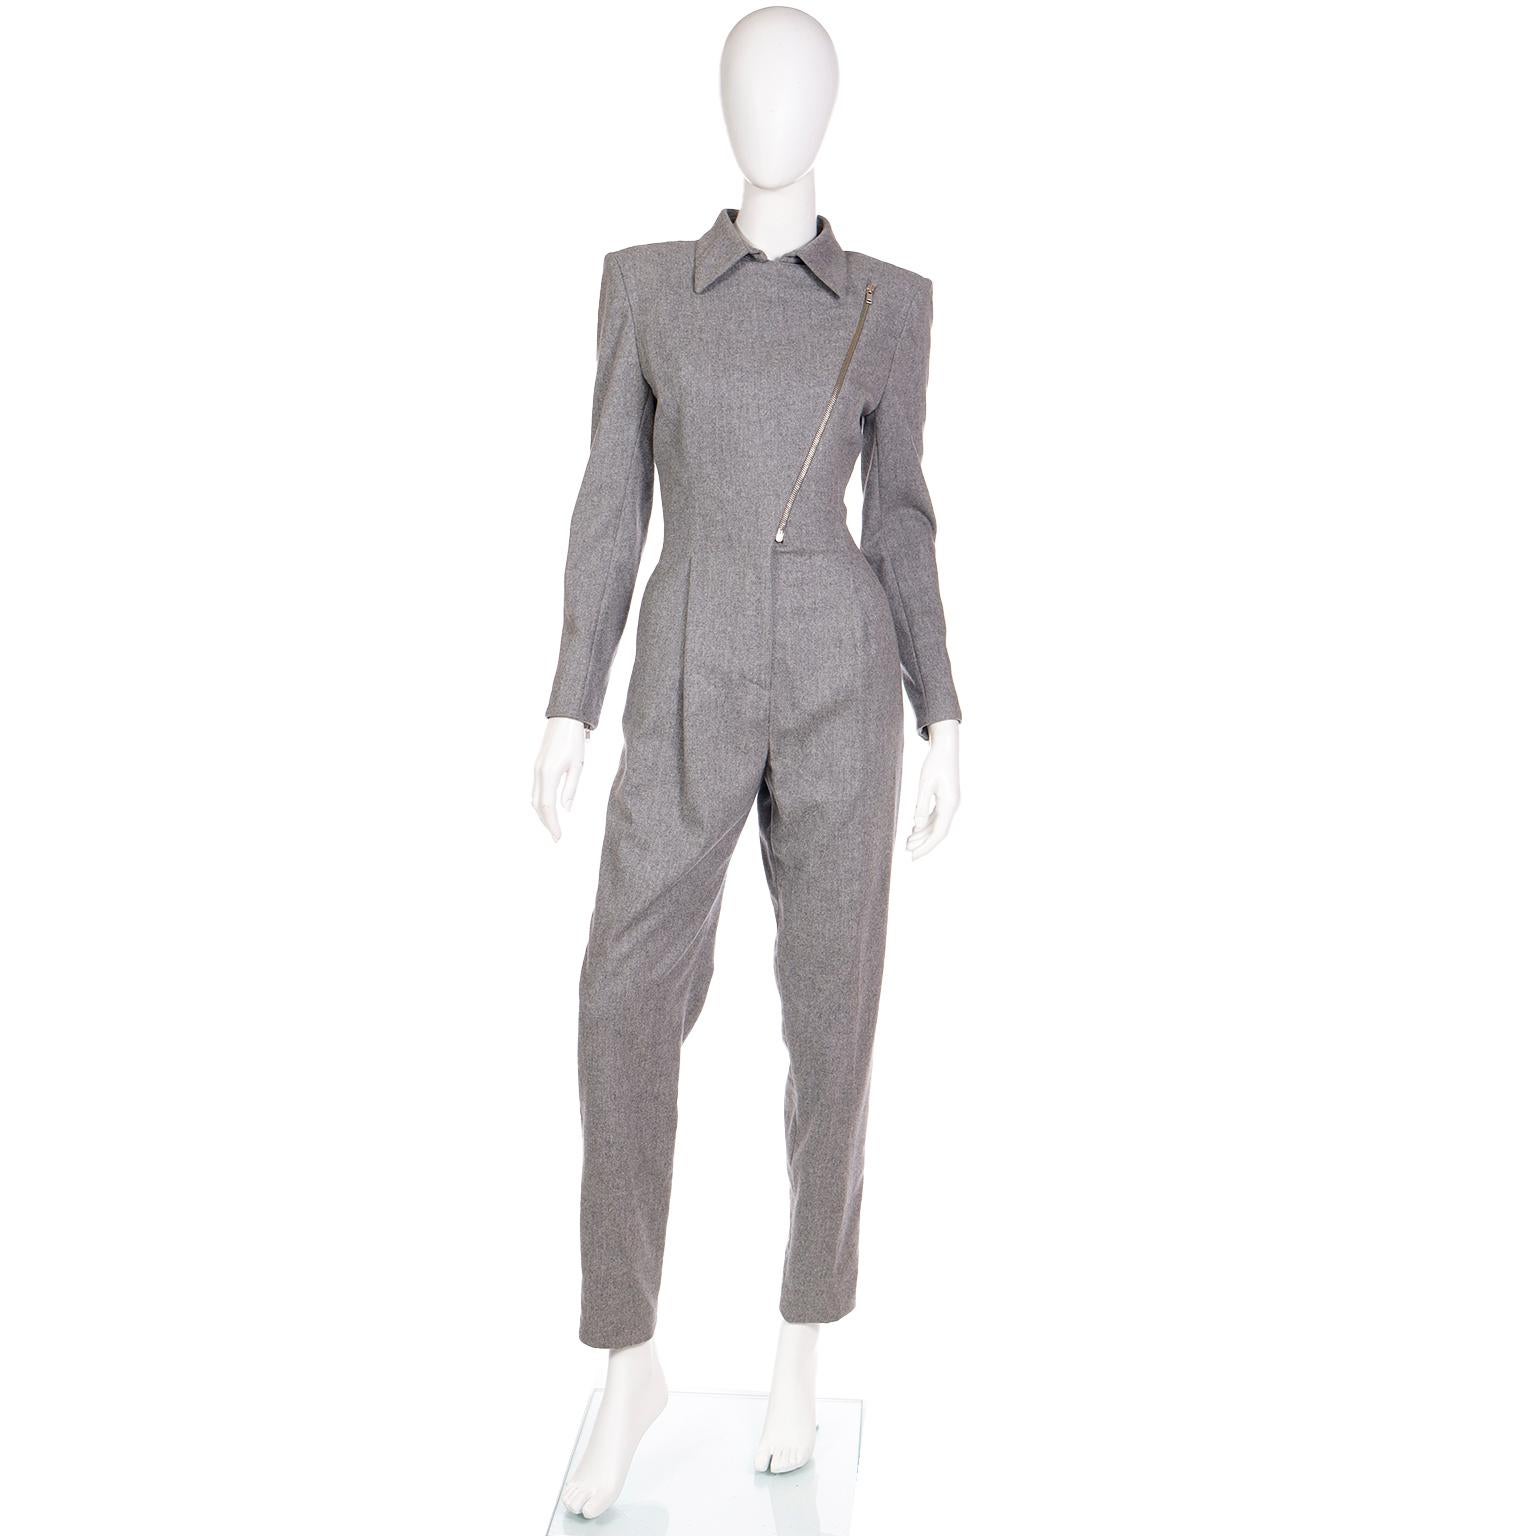 This is a spectacular vintage Claude Montana heather grey wool jumpsuit with many of Montana's signature details. The asymmetrical zip front bodice was a common design in Claude Montana's pieces and the high neckline and fitted waist create a